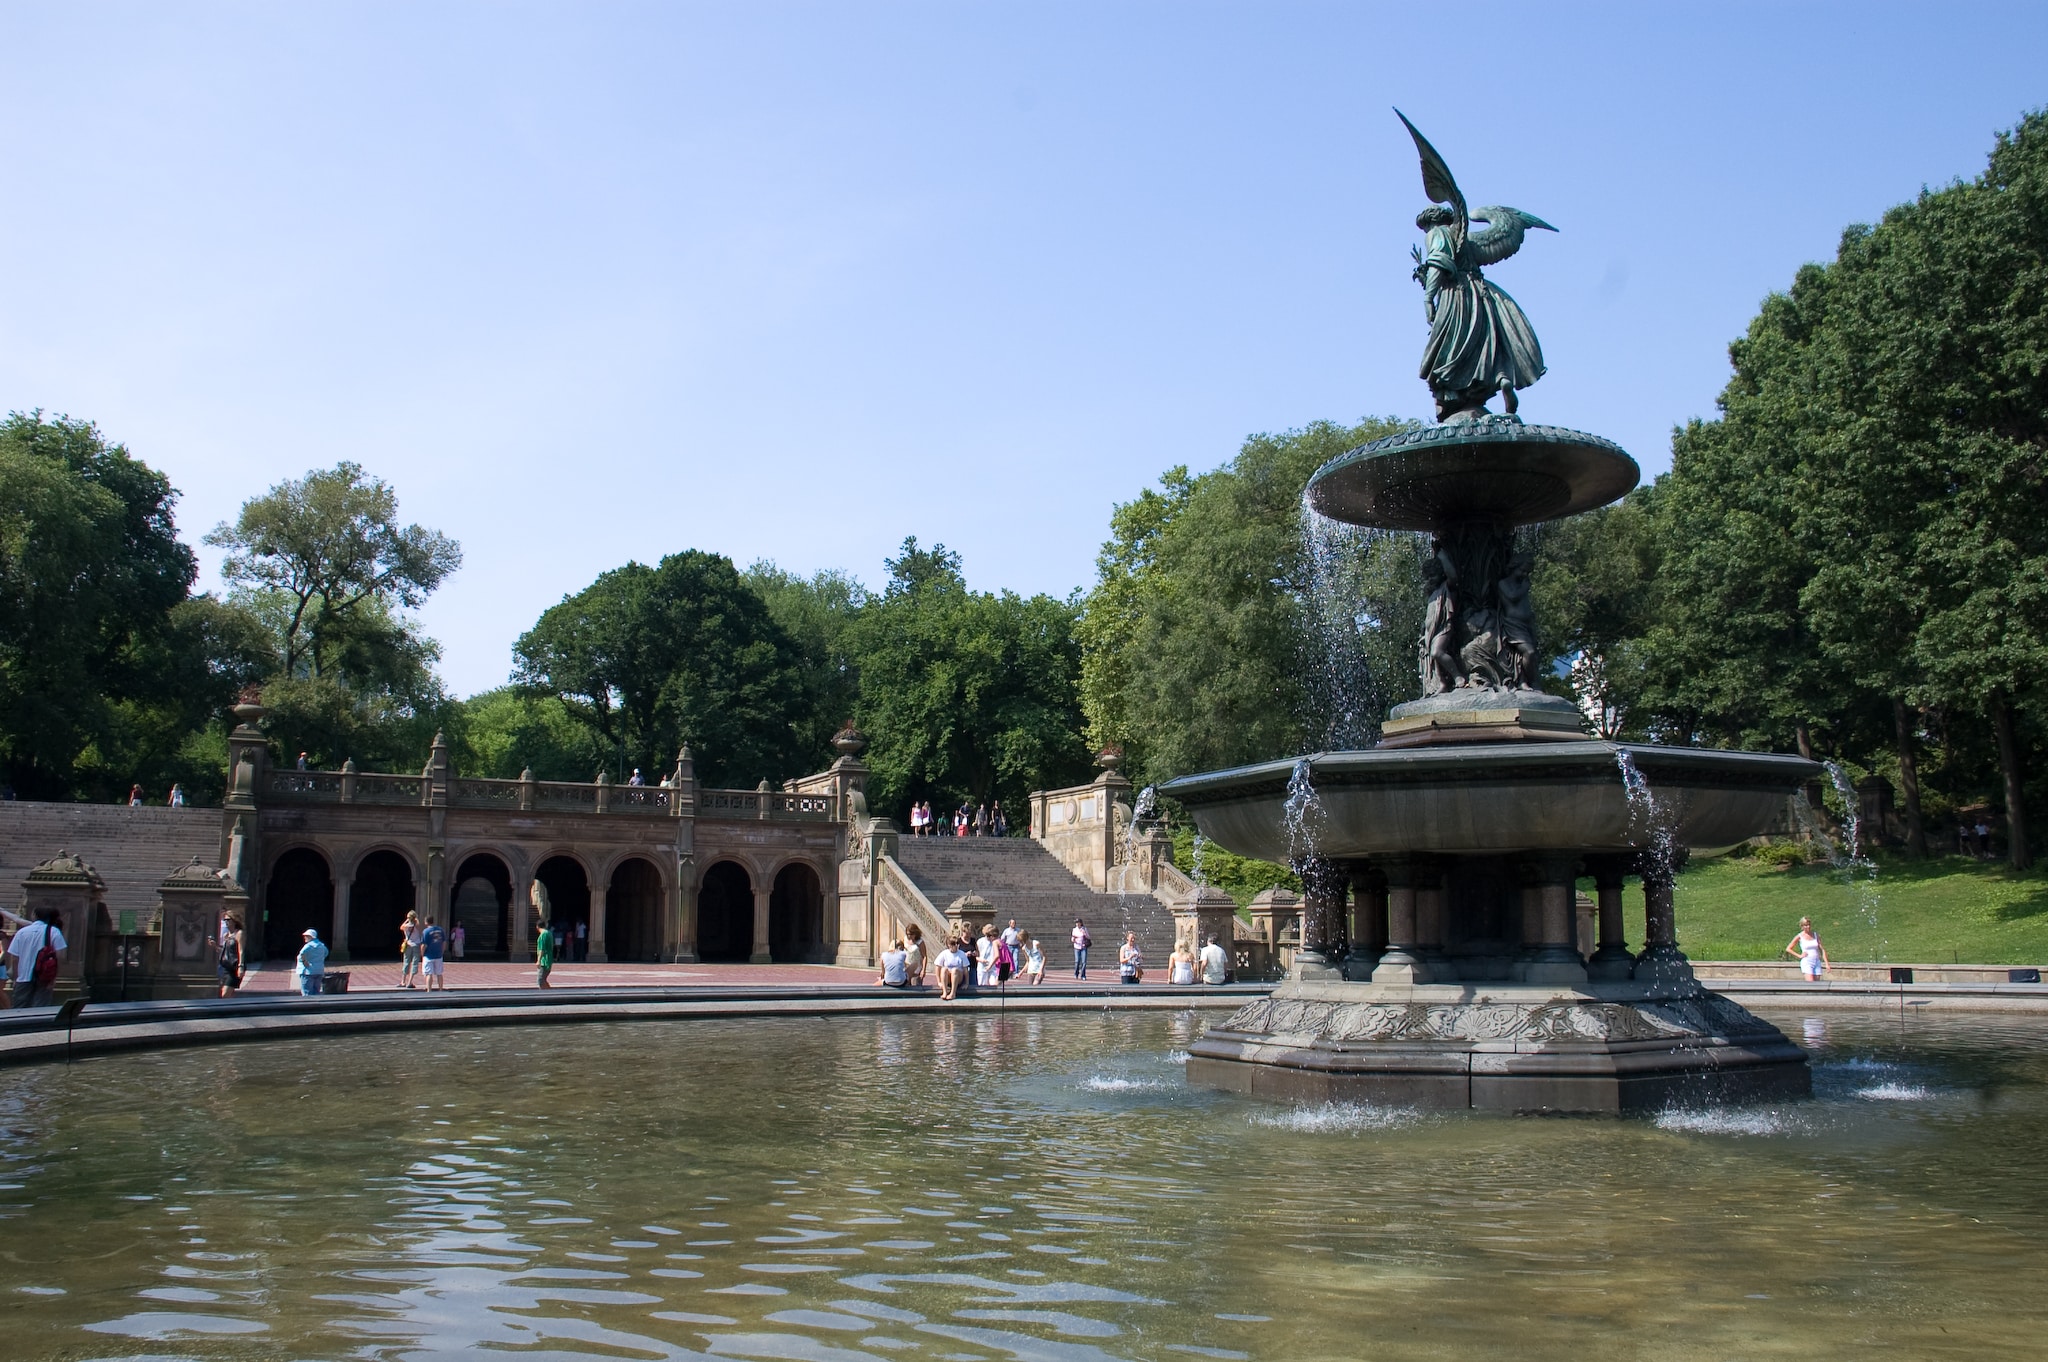 Bethesda Terrace - Central Park Things to See